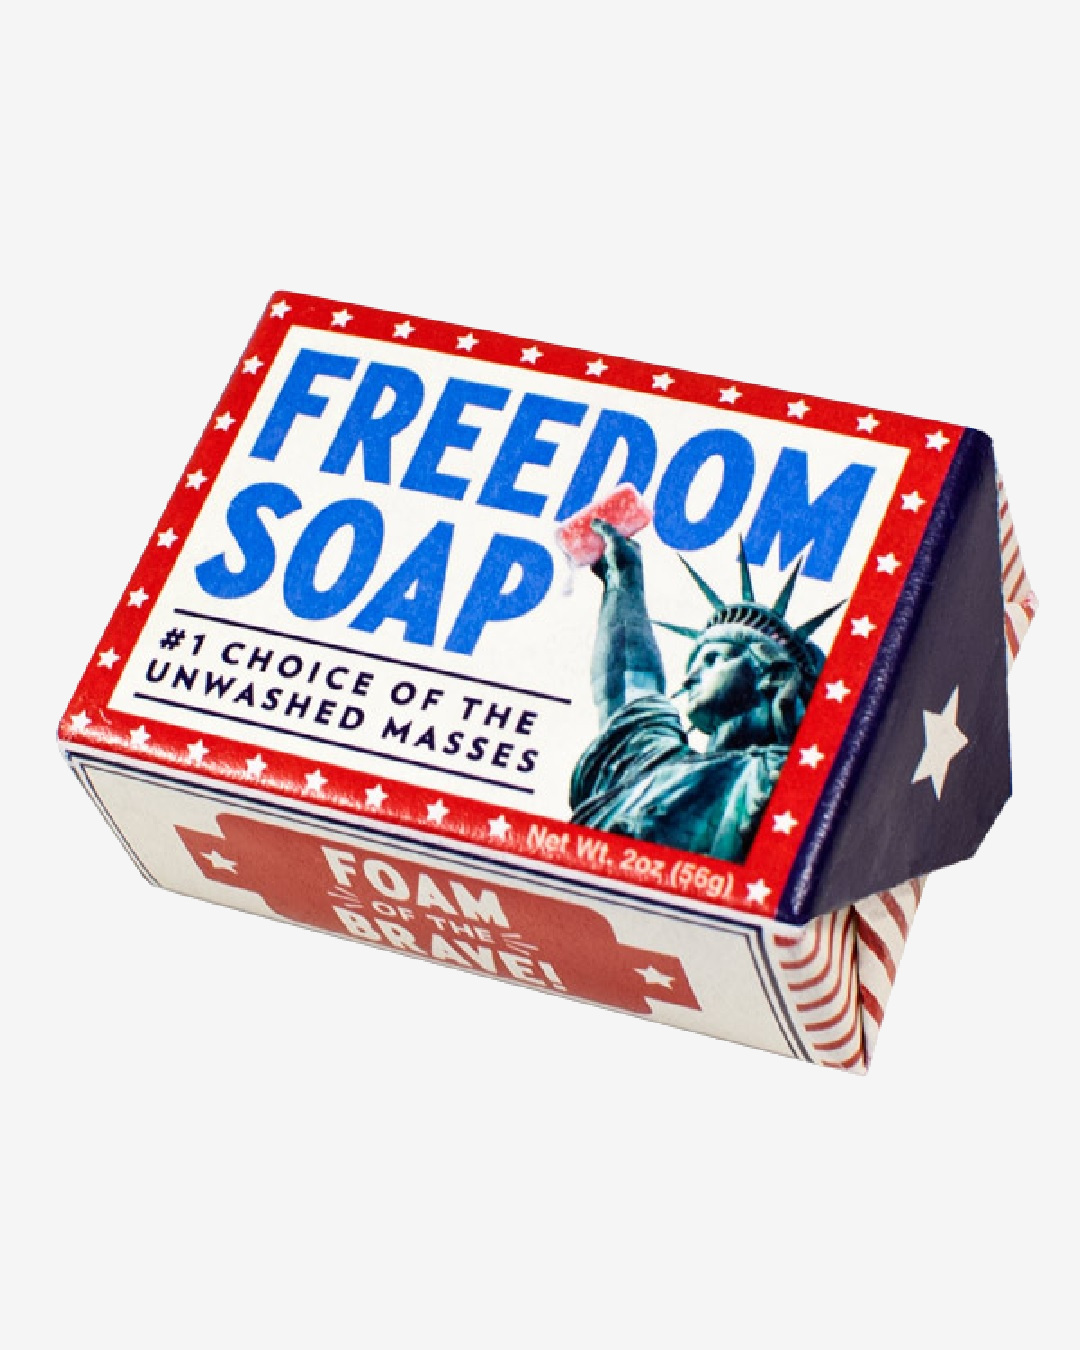 statue of liberty freedom soap